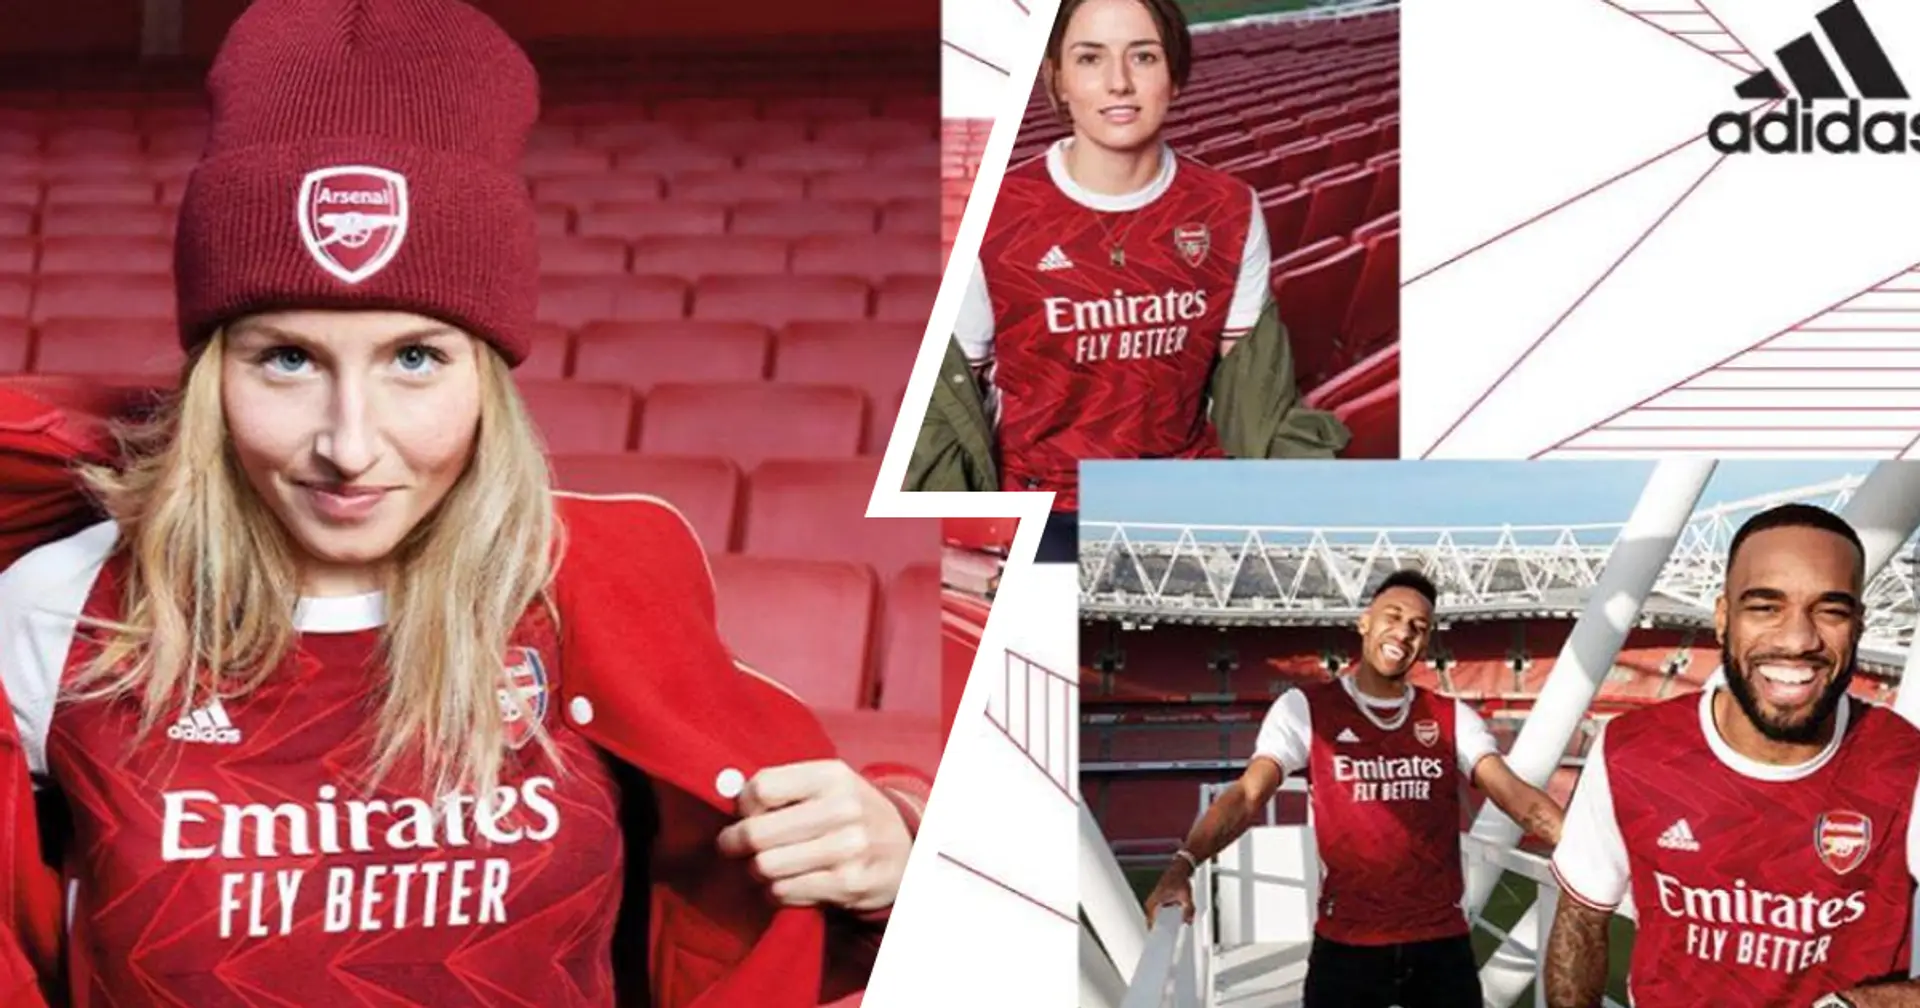 First pictures of Arsenal players, including Aubameyang, in next season's home shirt leaked